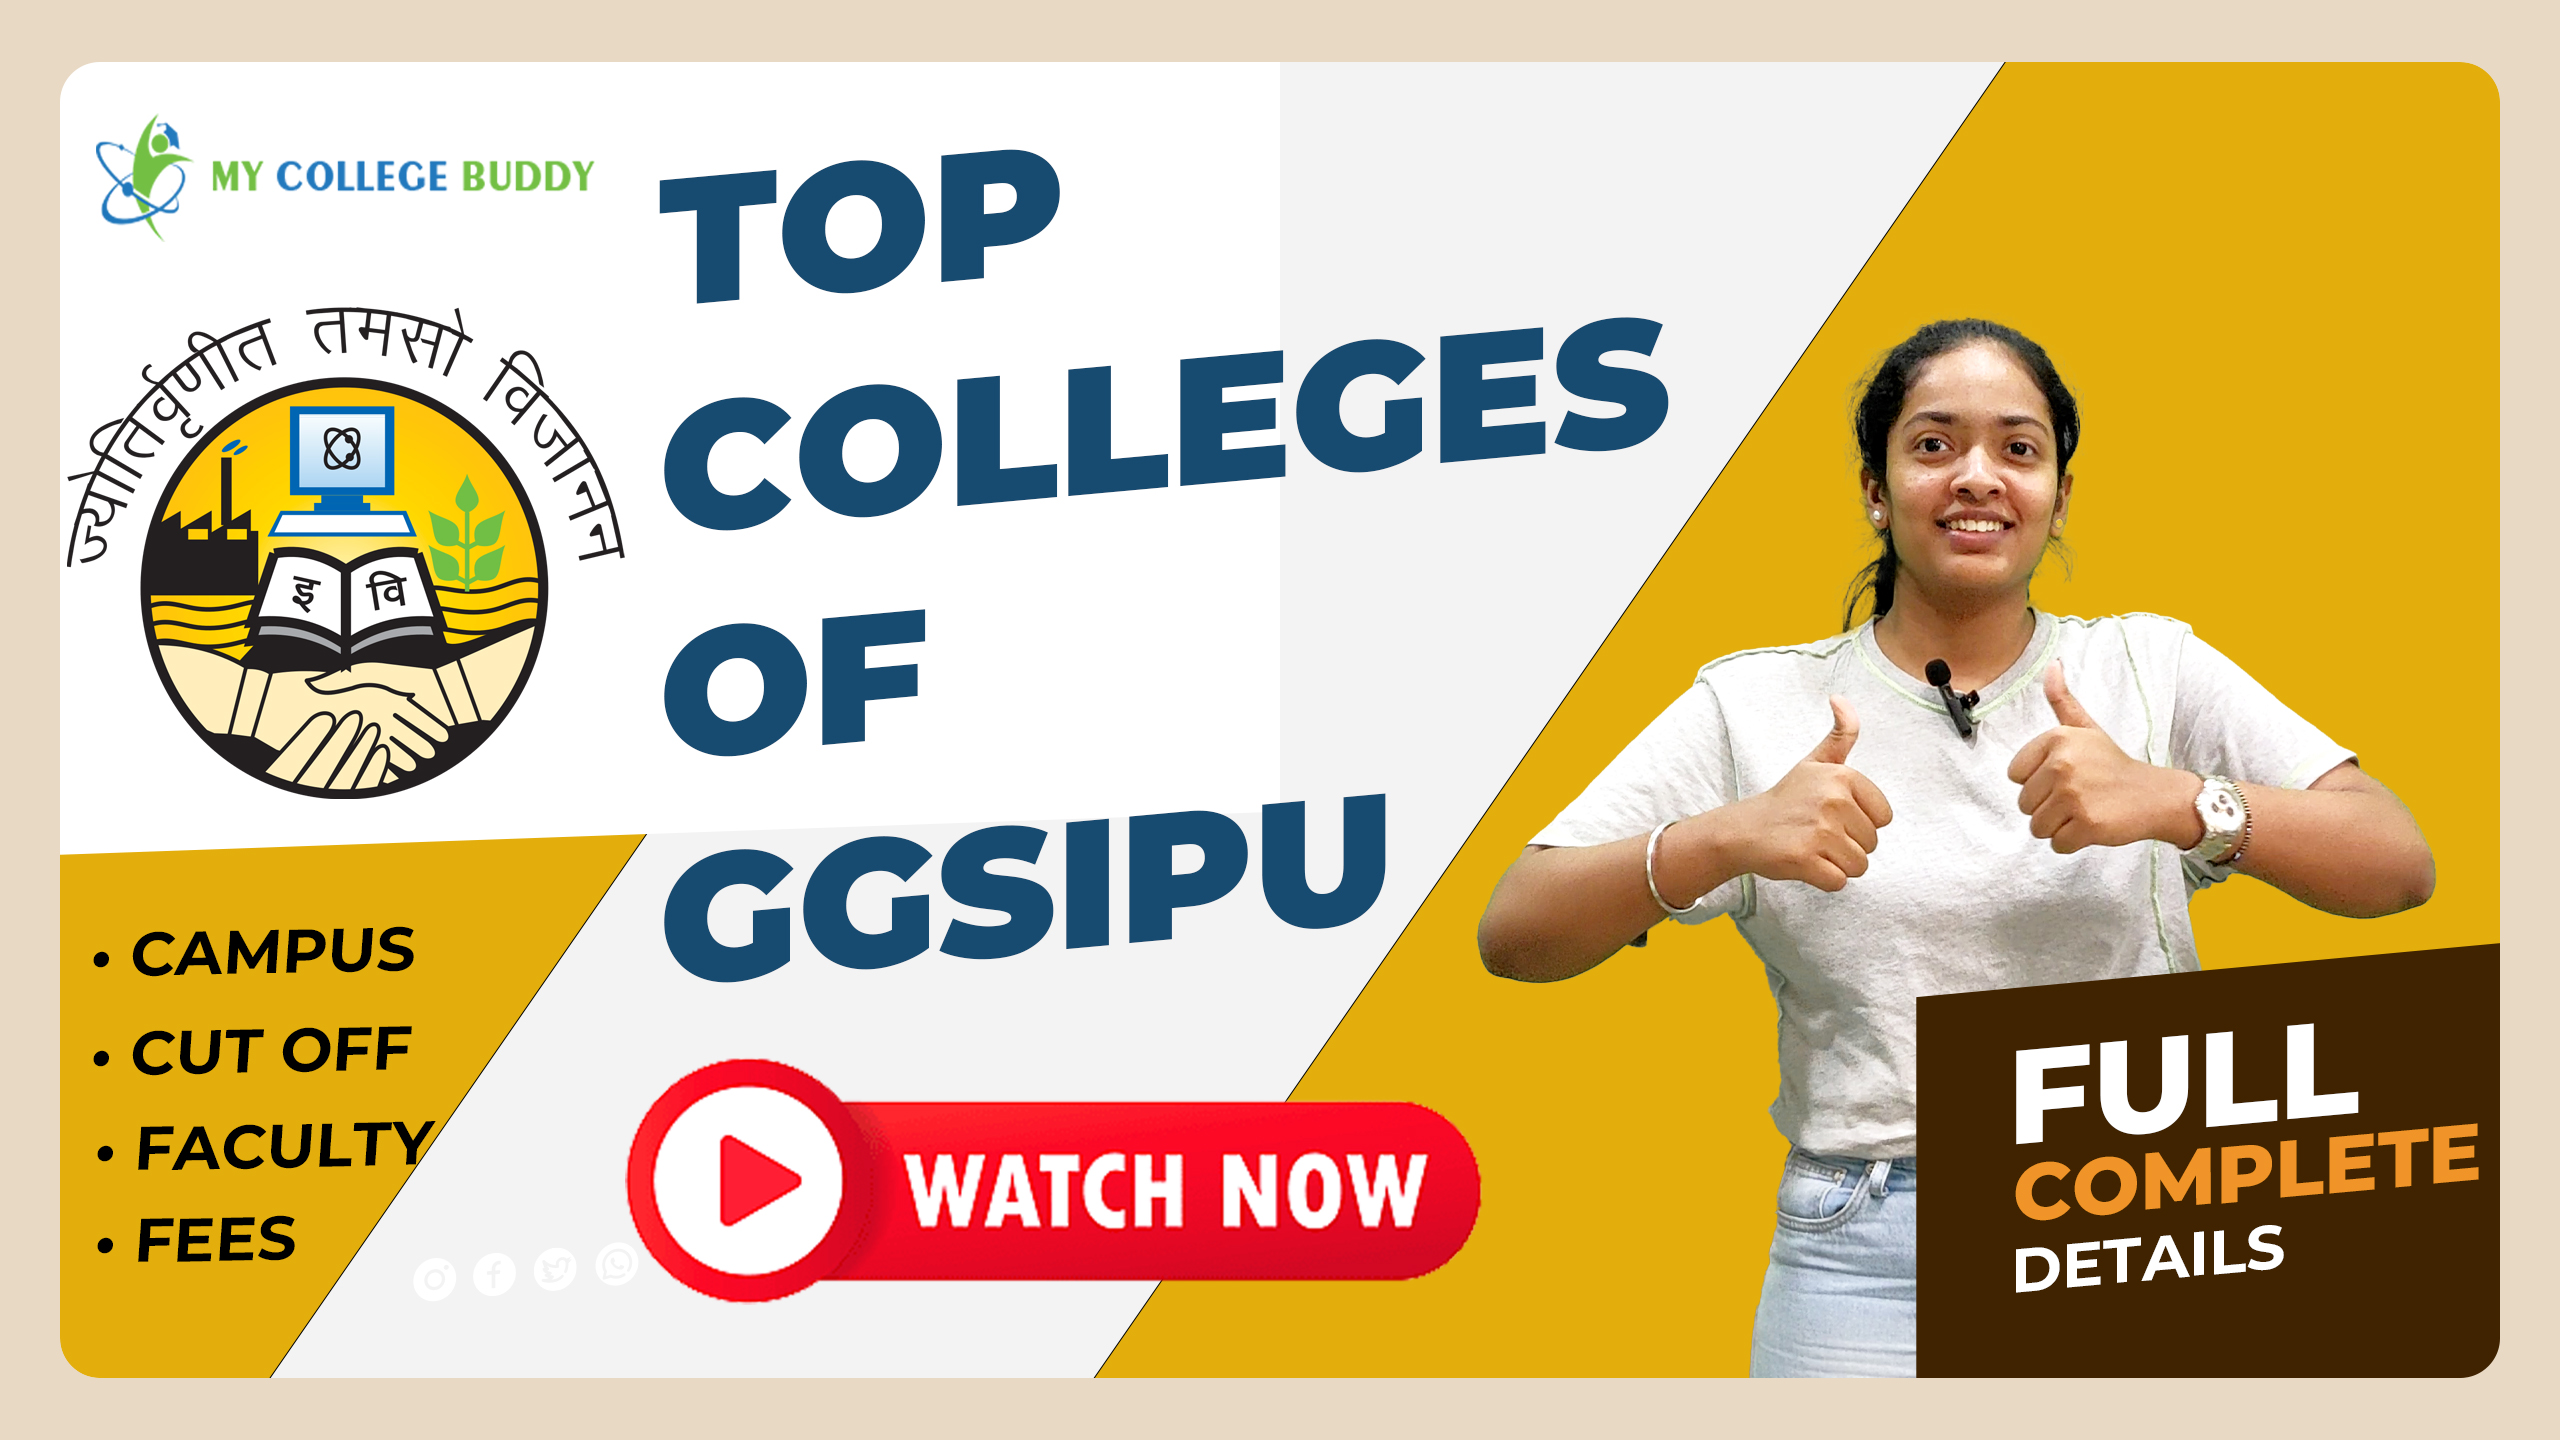 Top GGSIPU Colleges